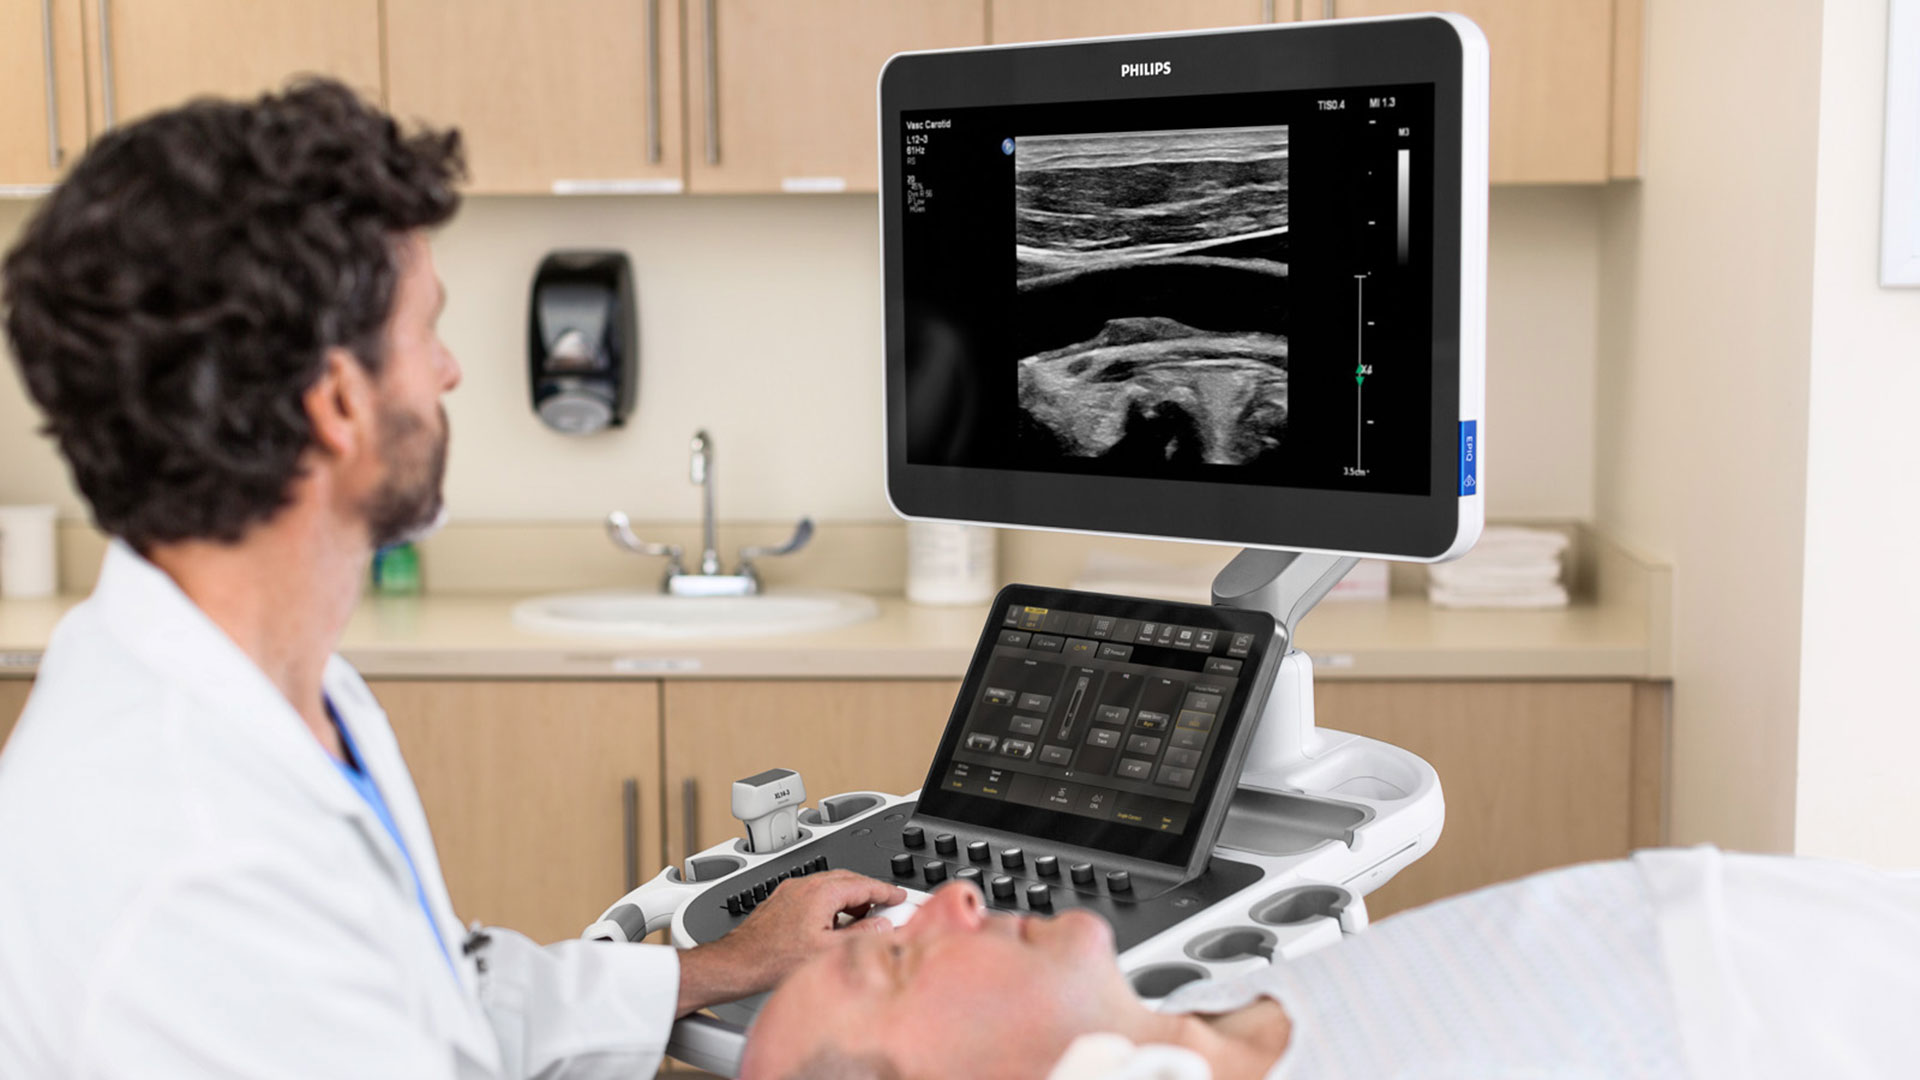 Philips expands portfolio with EPIQ Elite premium ultrasound system for General Imaging and Obstetrics & Gynecology to improve clinical confidence and the patient experience